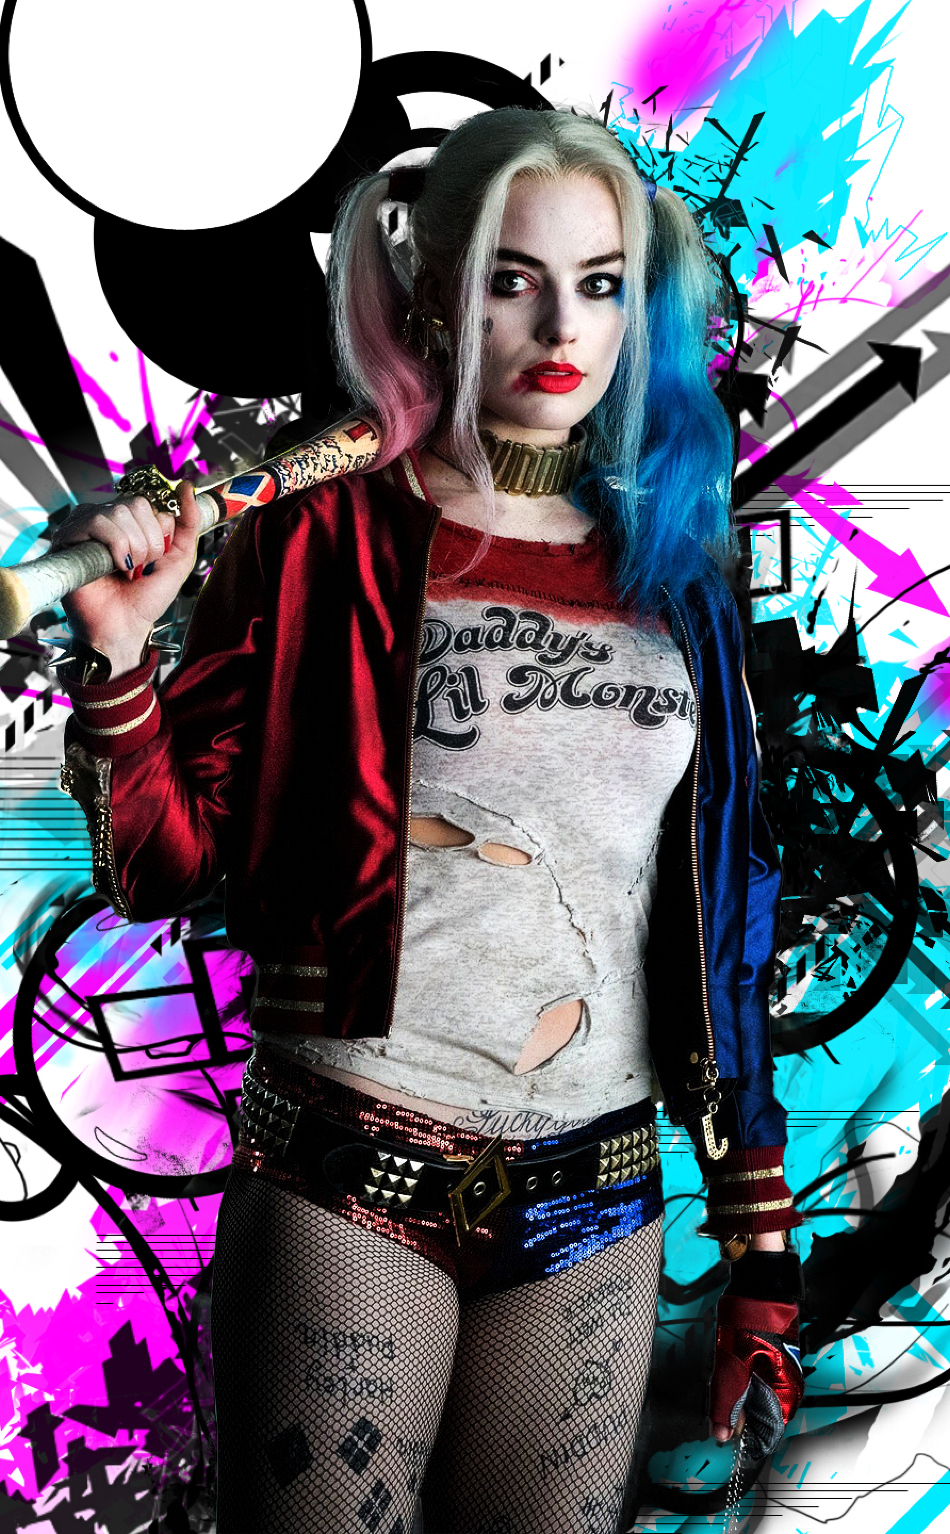 harley quinn wallpaper for iphone,pink,fashion,cool,magenta,graphic design